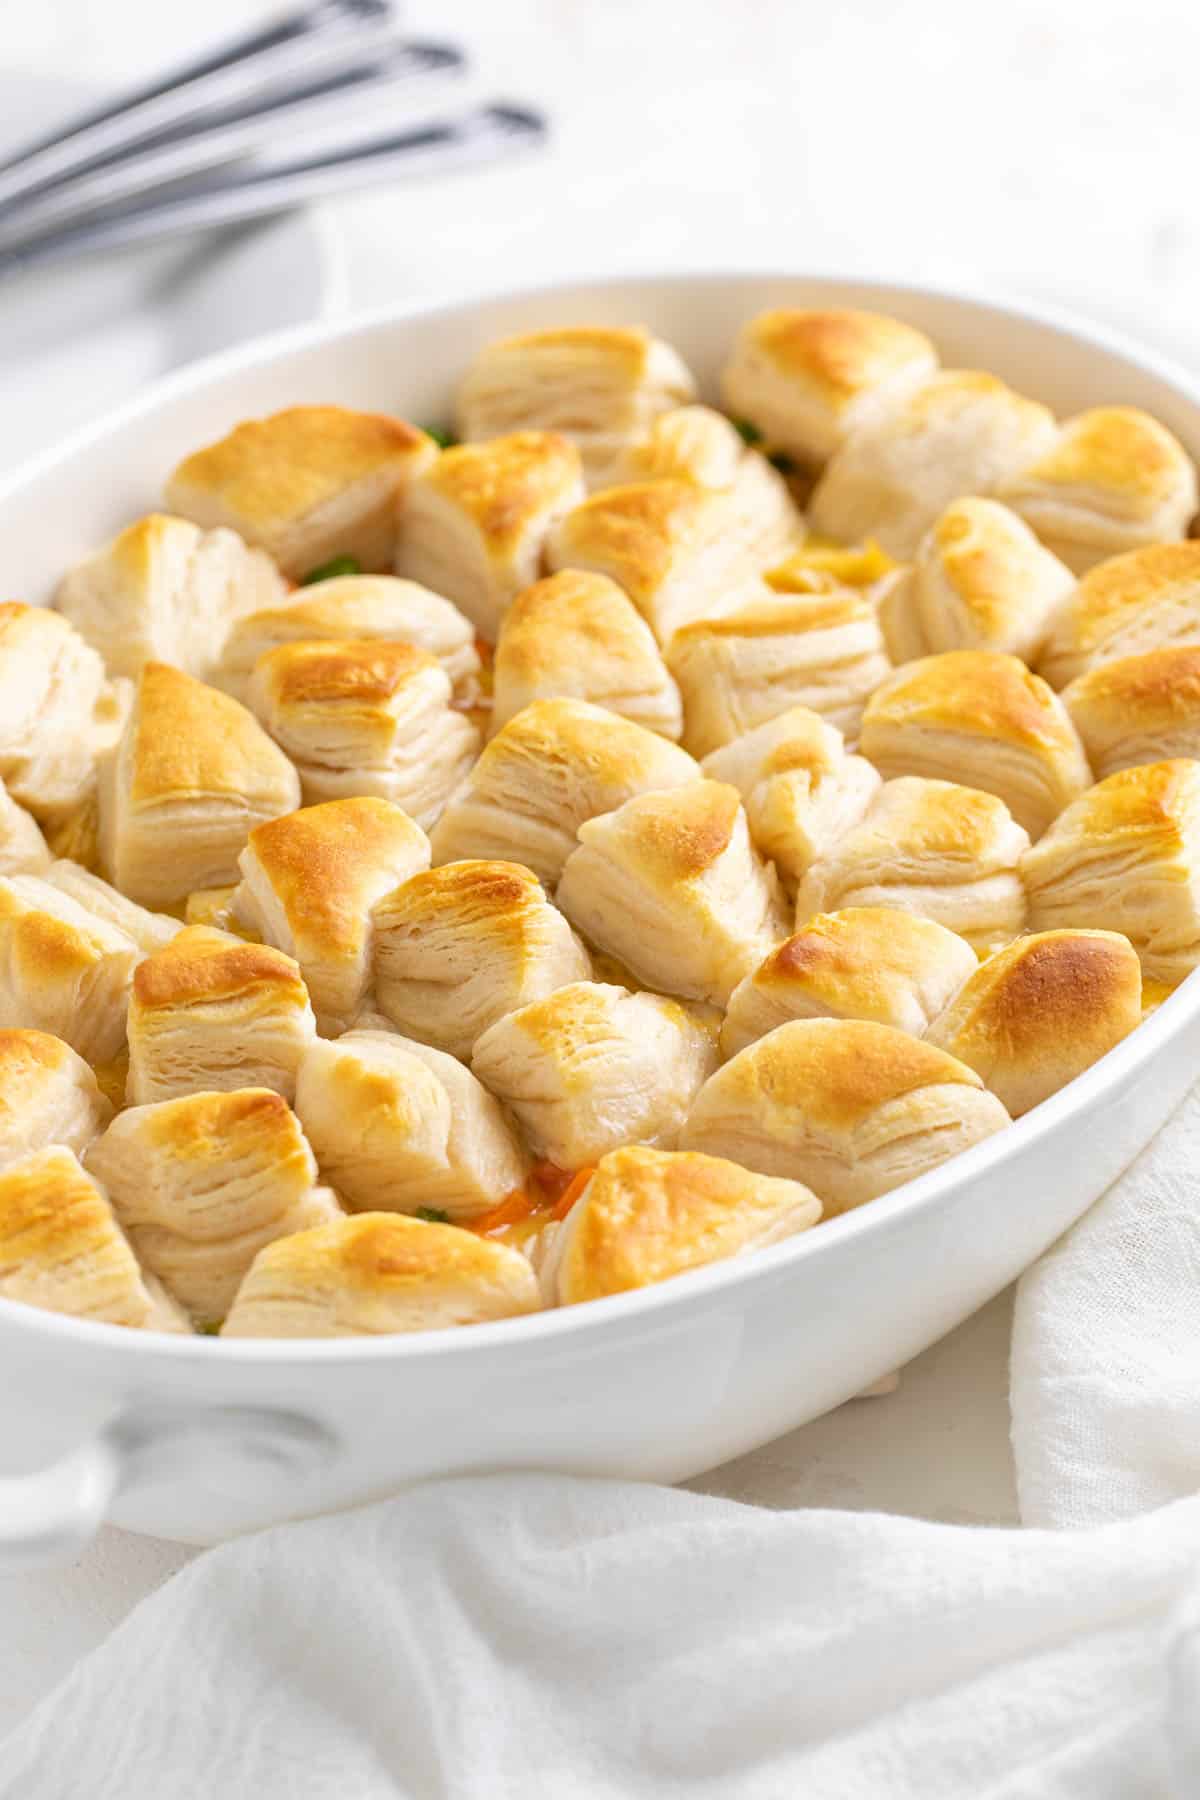 Cheesy chicken pot pie topped with quartered canned biscuits in an oval white baking dish.